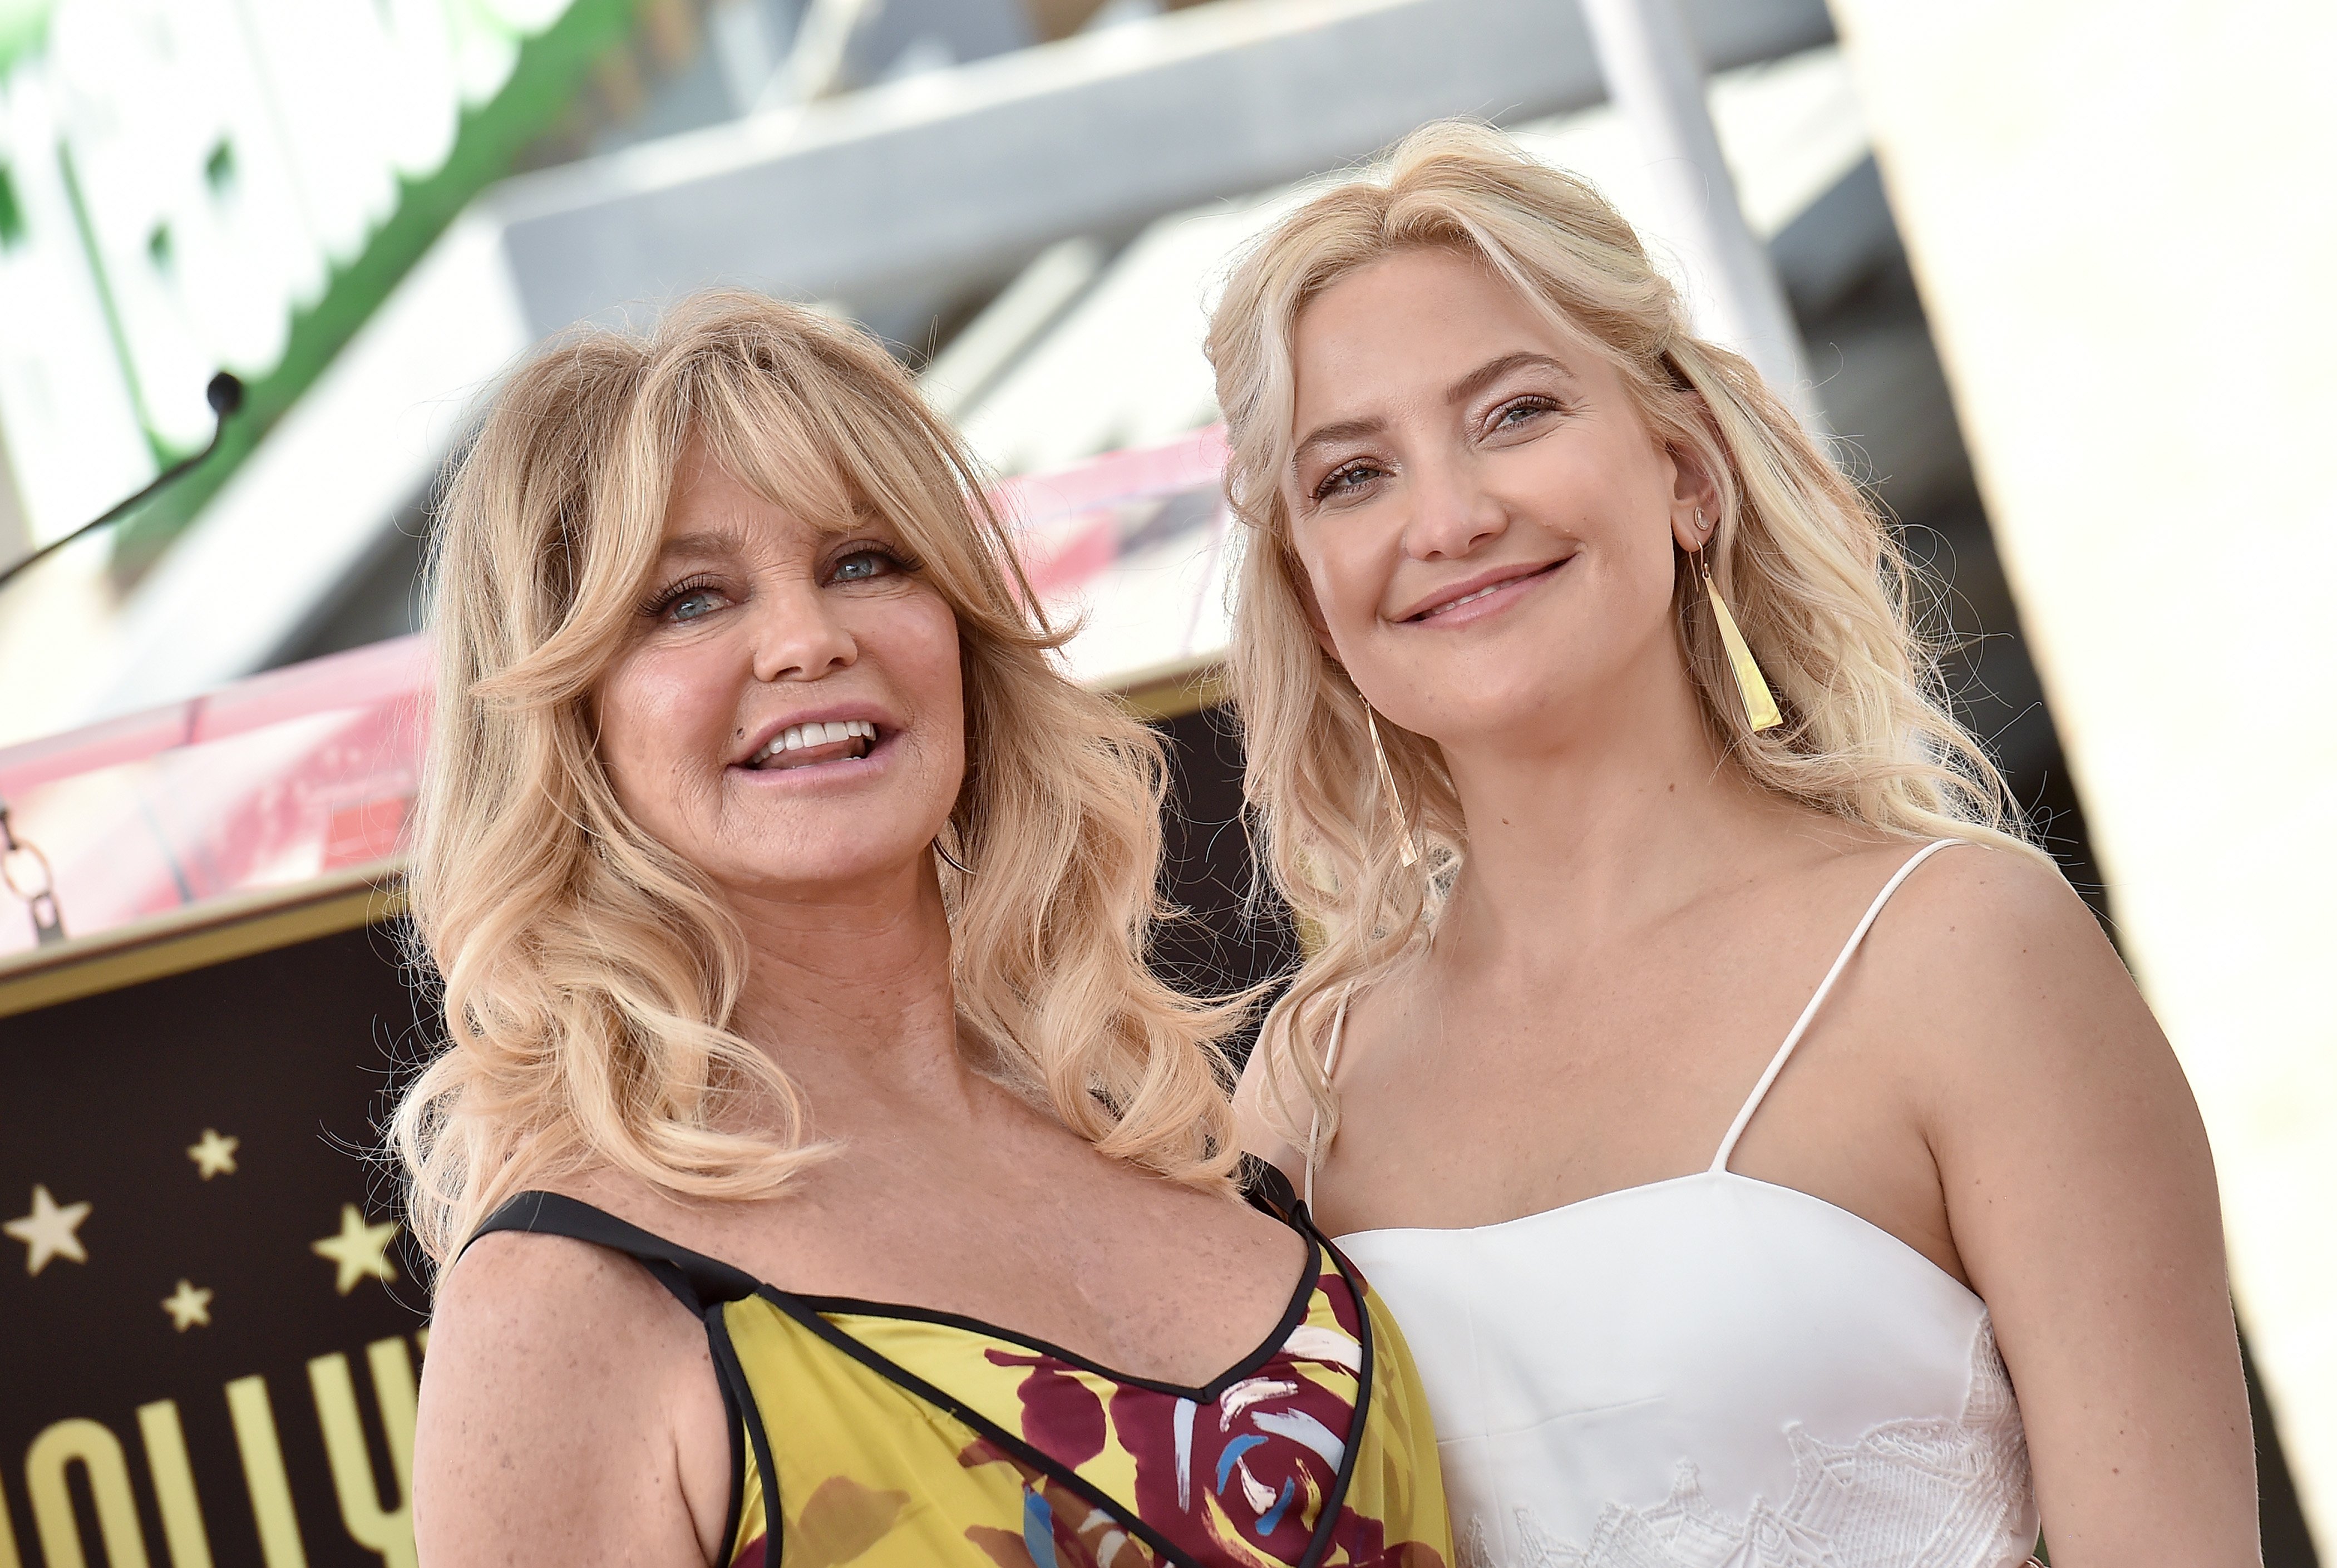 Goldie Hawn and her daughter Kate Hudson attend the ceremony honoring Goldie Hawn and Kurt Russell with stars on the Hollywood Walk of Fame on May 4, 2017, in Hollywood, California. | Source: Getty Images